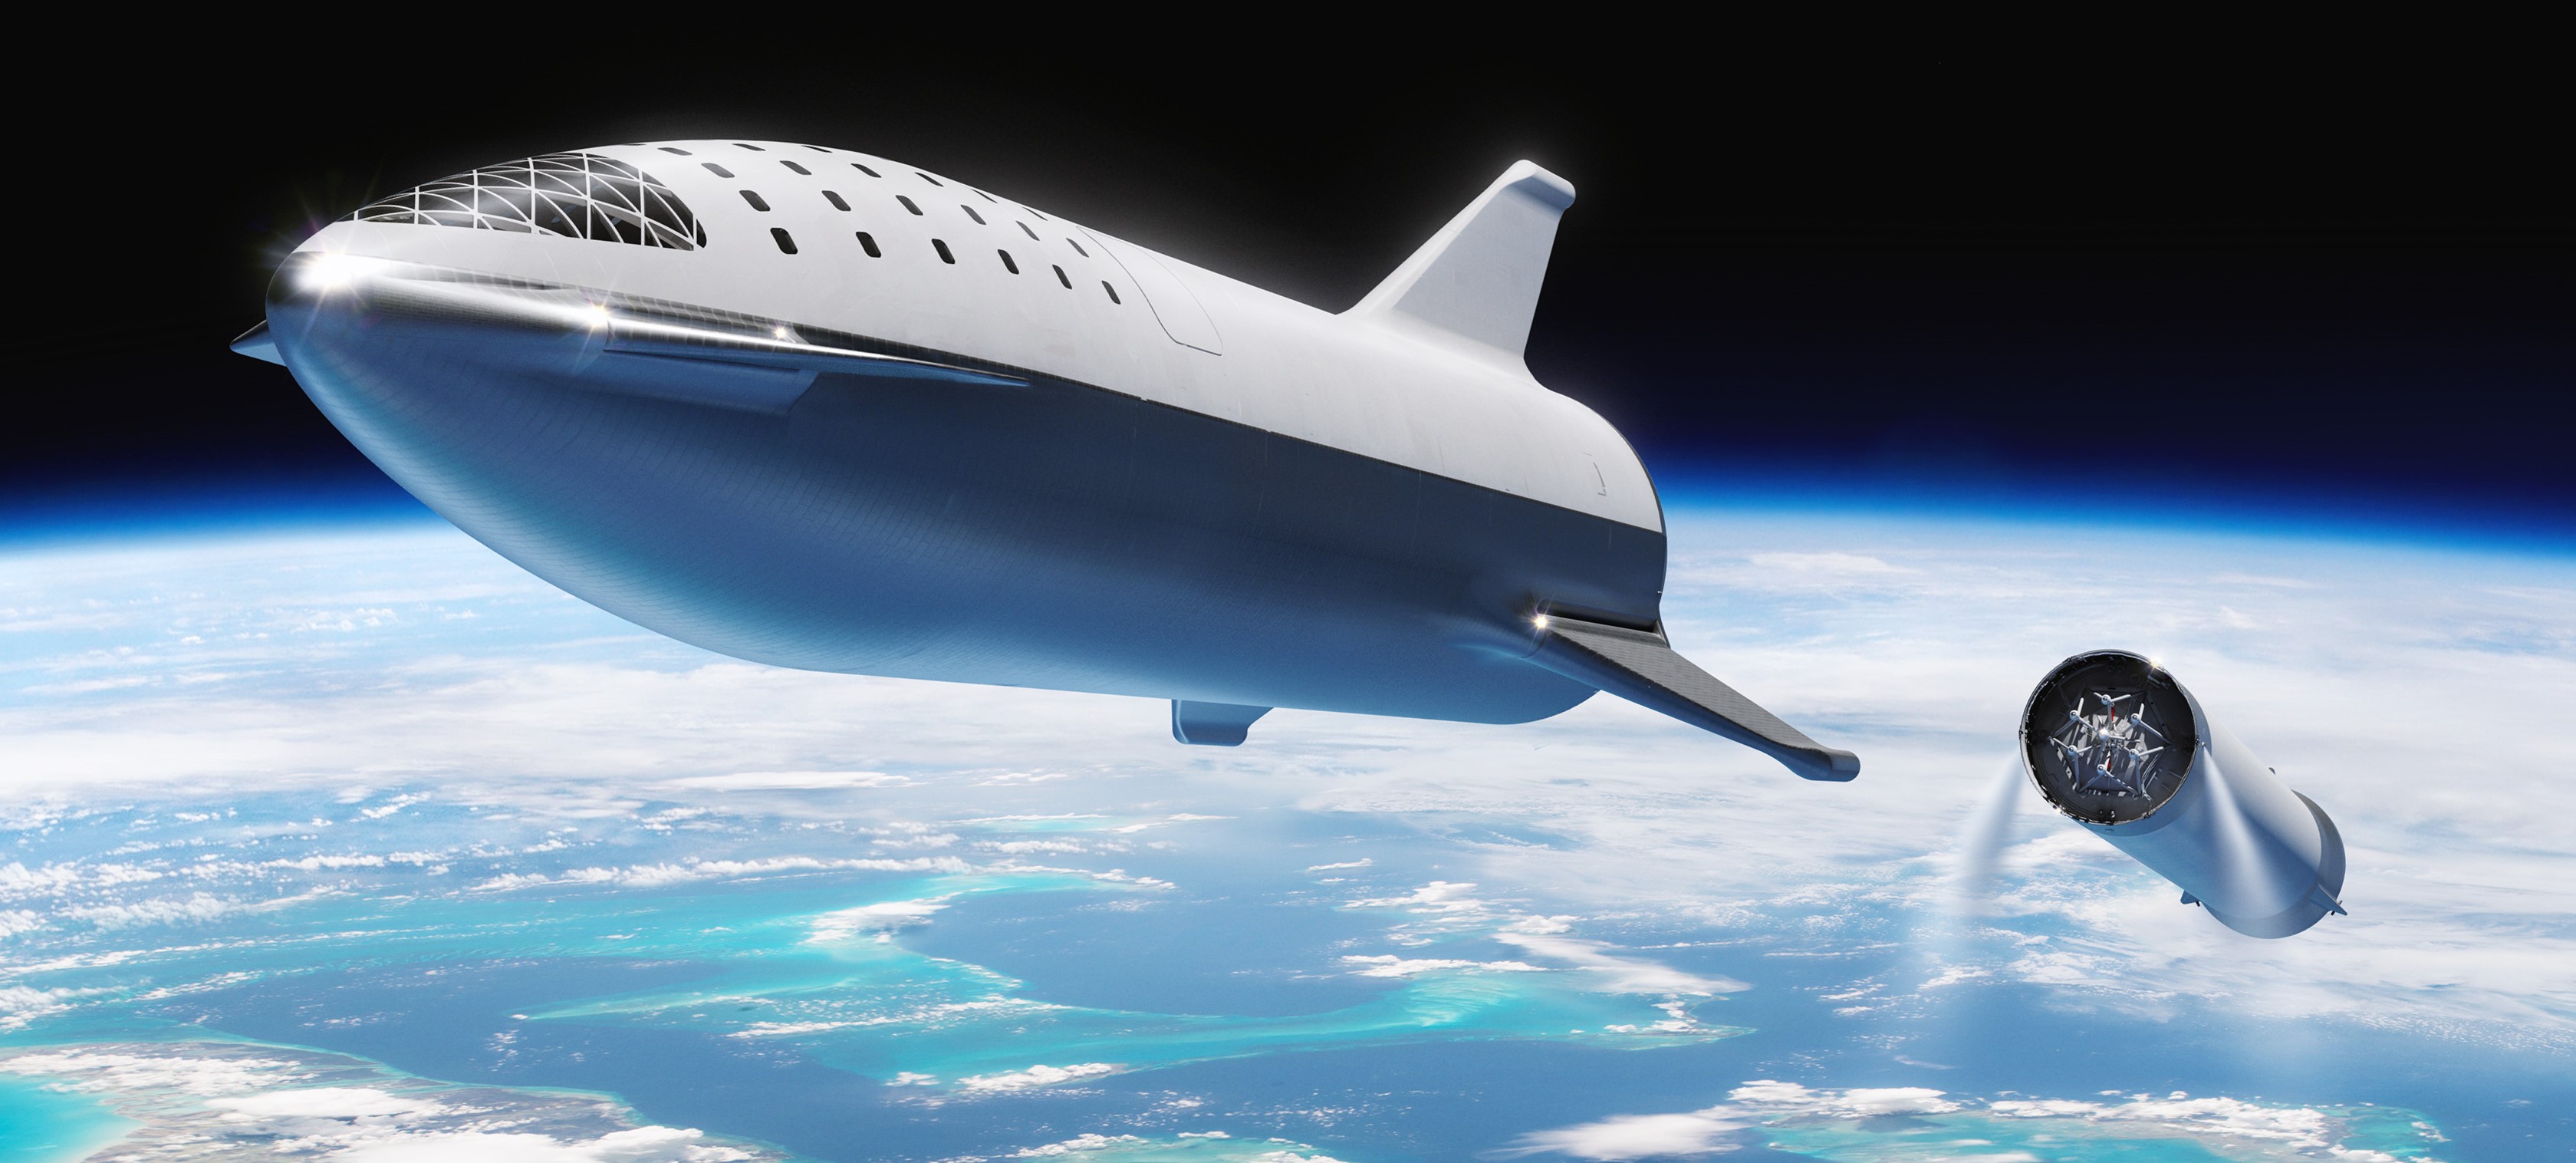 bfr-2018-spaceship-and-booster-sep-spacex-crop1